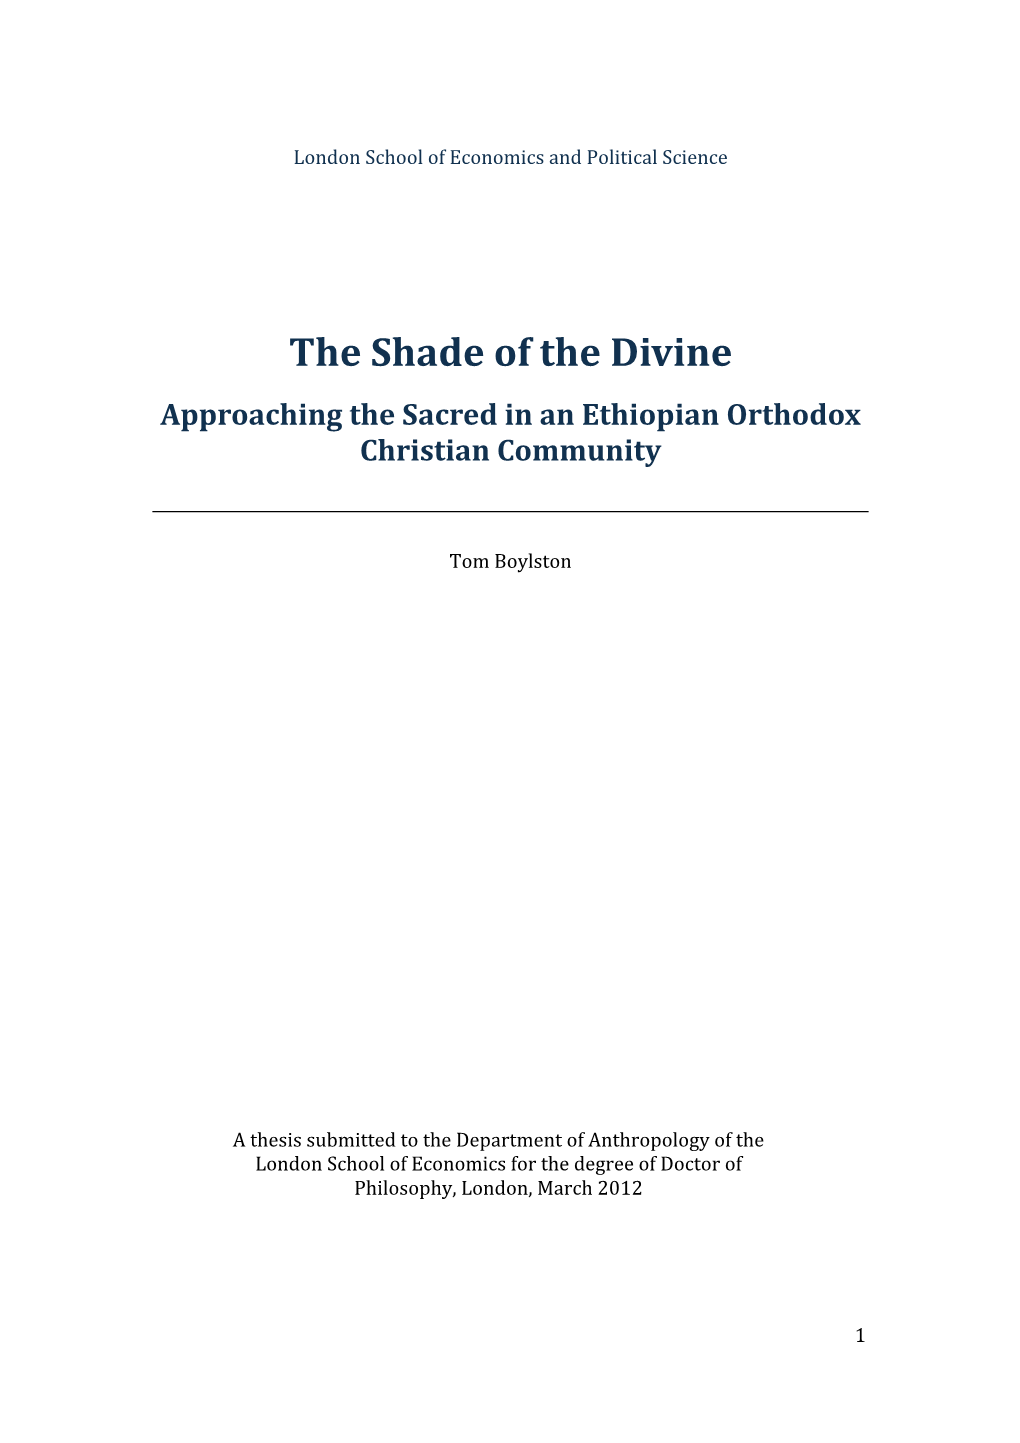 The Shade of the Divine Approaching the Sacred in an Ethiopian Orthodox Christian Community